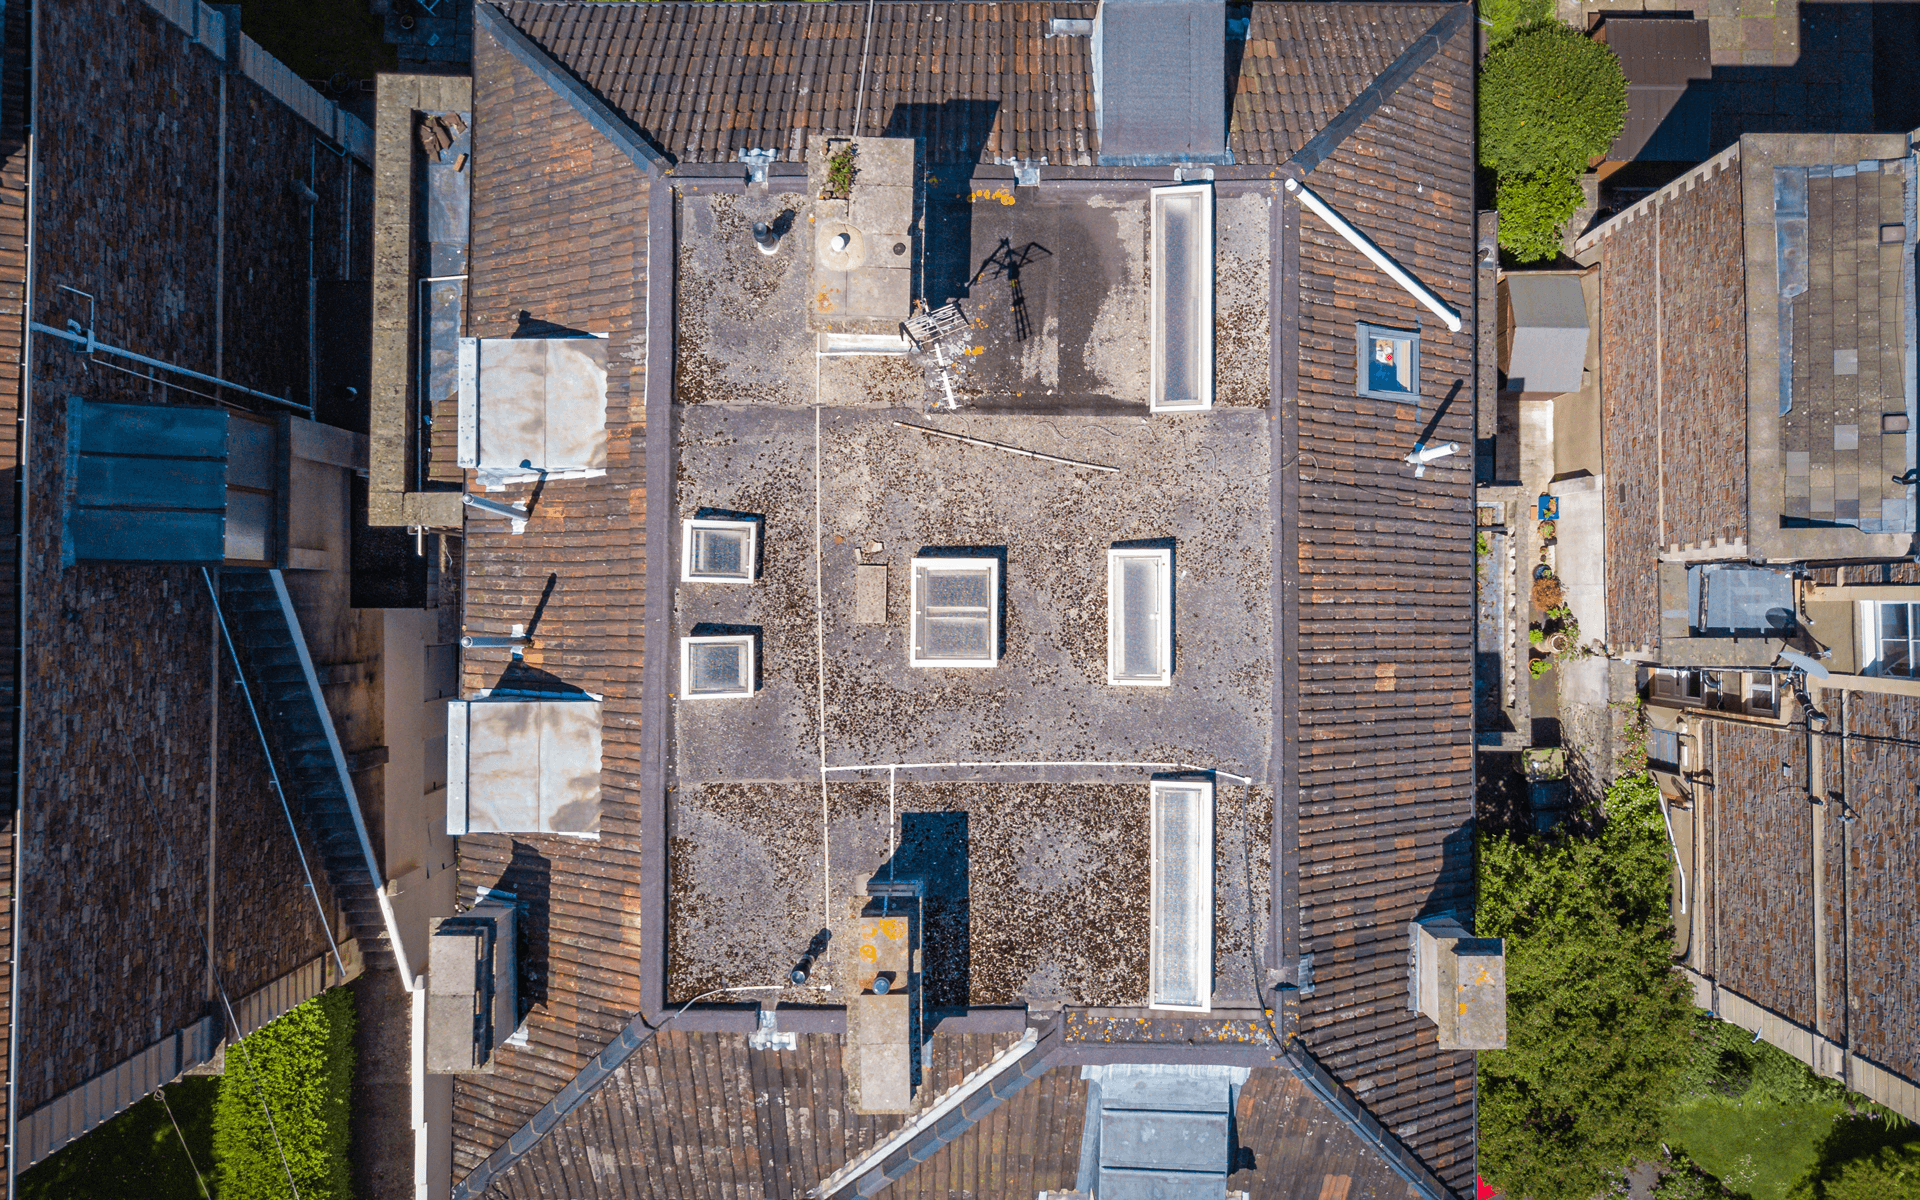 "Mavic Pro" aerial drone photo for a roof survey at "The West Of England Friends Housing Society"